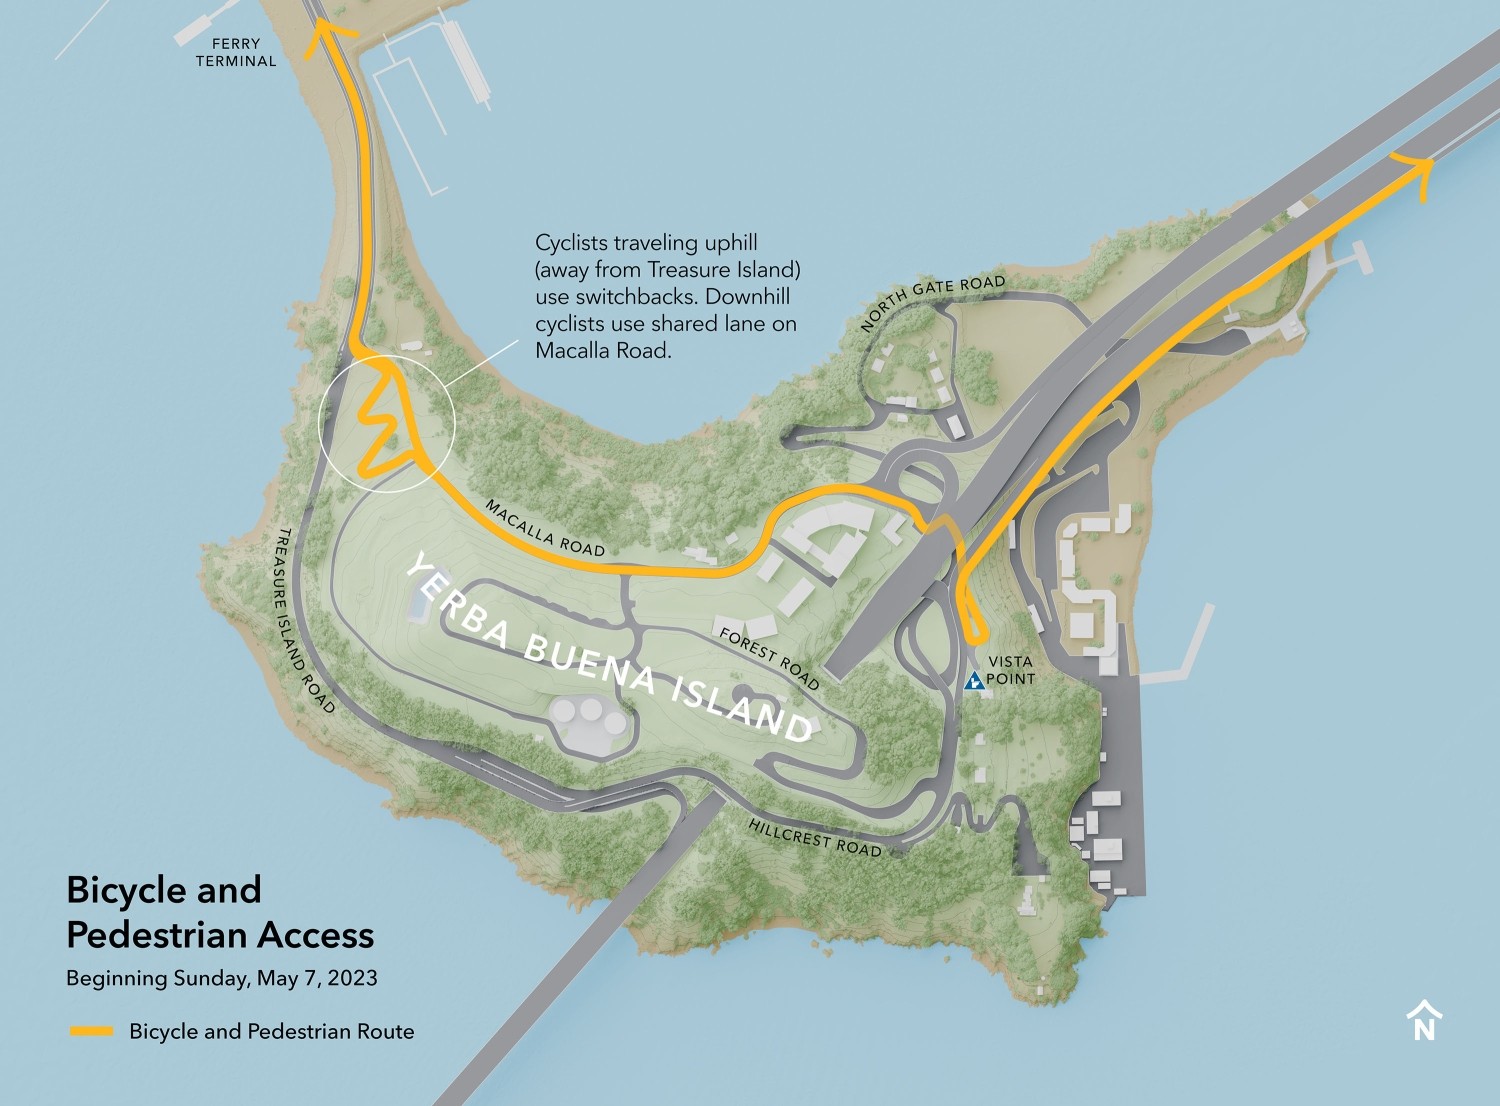 A map of Yerba Buena Island, with north pointing up, showing the bicycle and pedestrian route between Treasure Island and the Bay Bridge.